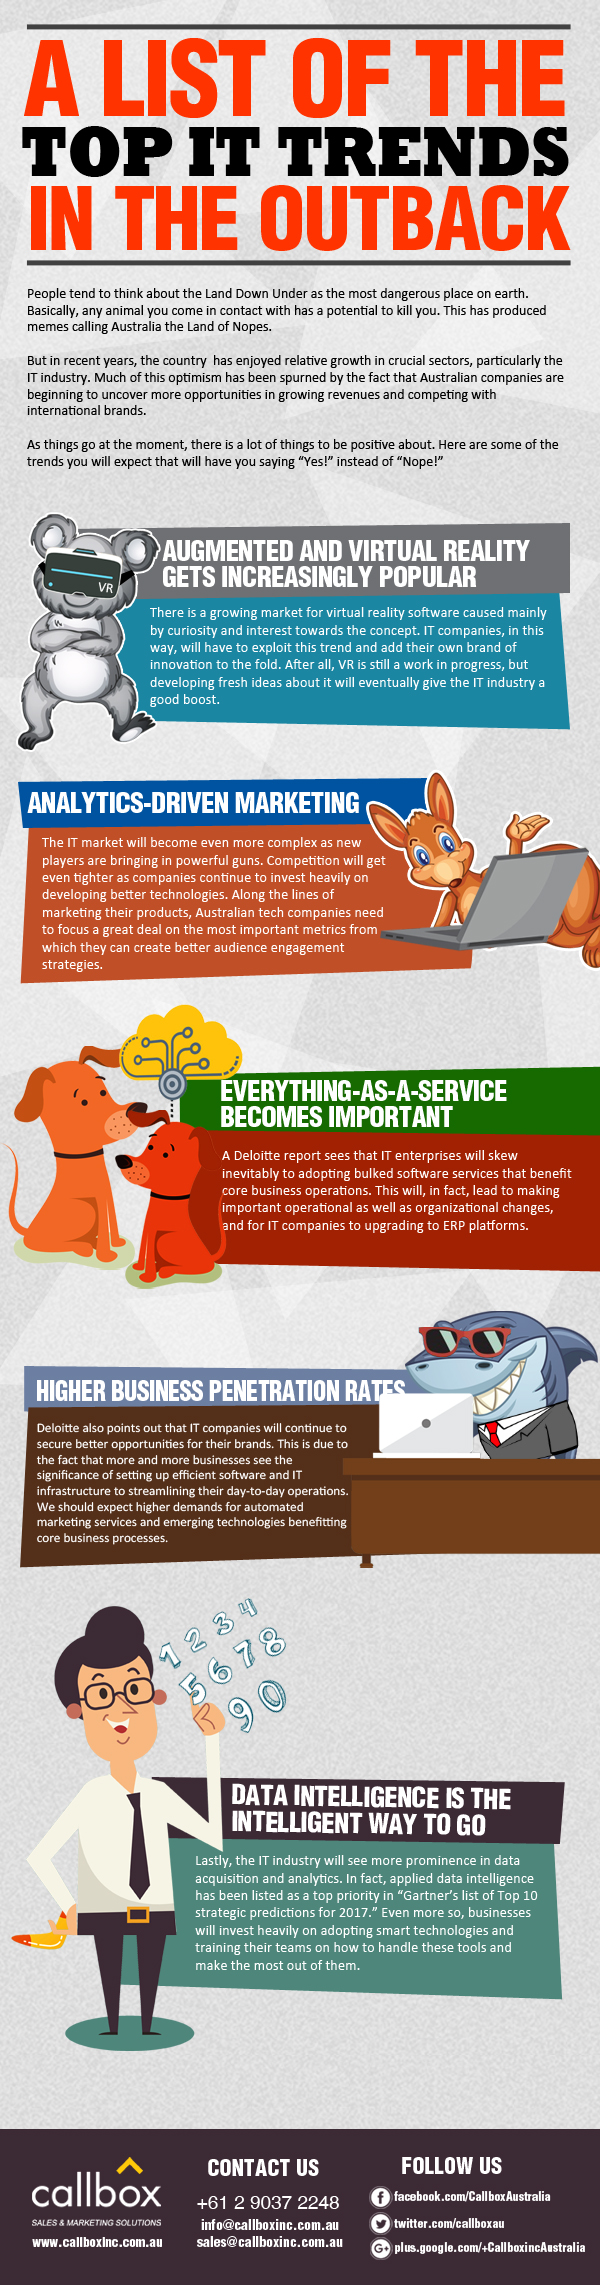 List of Top IT Trends in the Outback Infographic